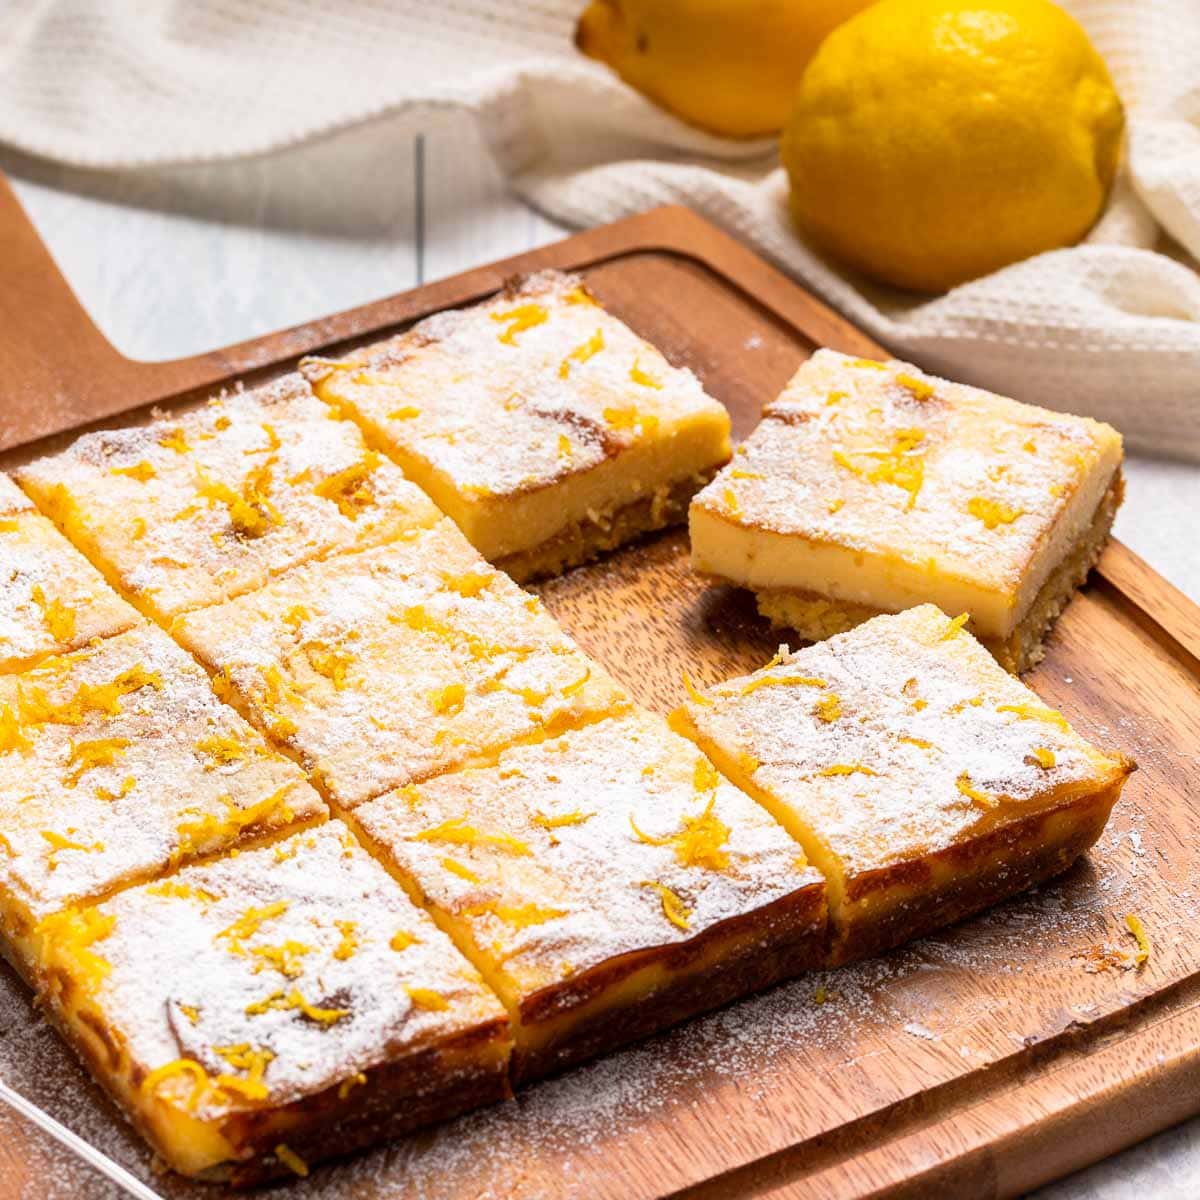 Nine keto lemon bars on a cutting board with a lemon in the background.